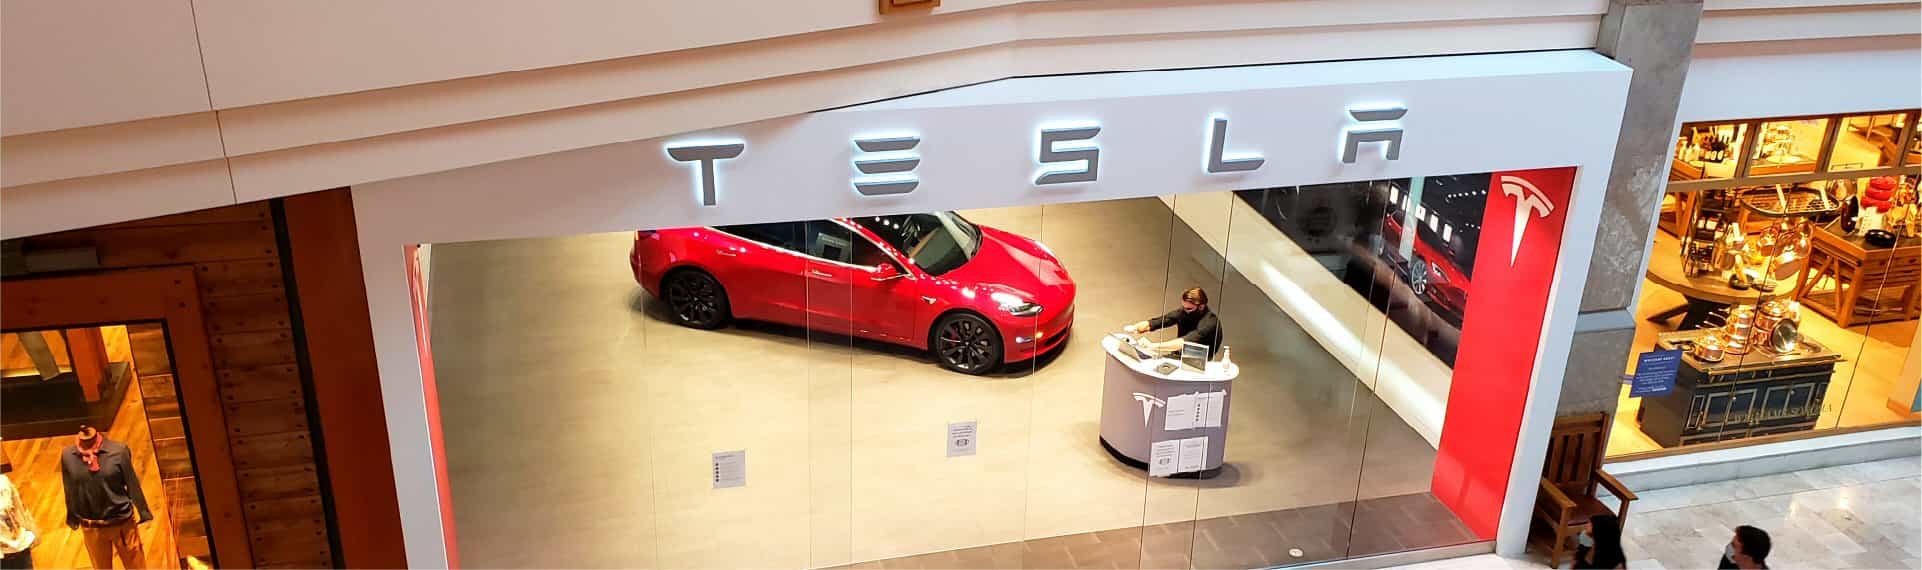 overhead view of the exterior of a Tesla showroom